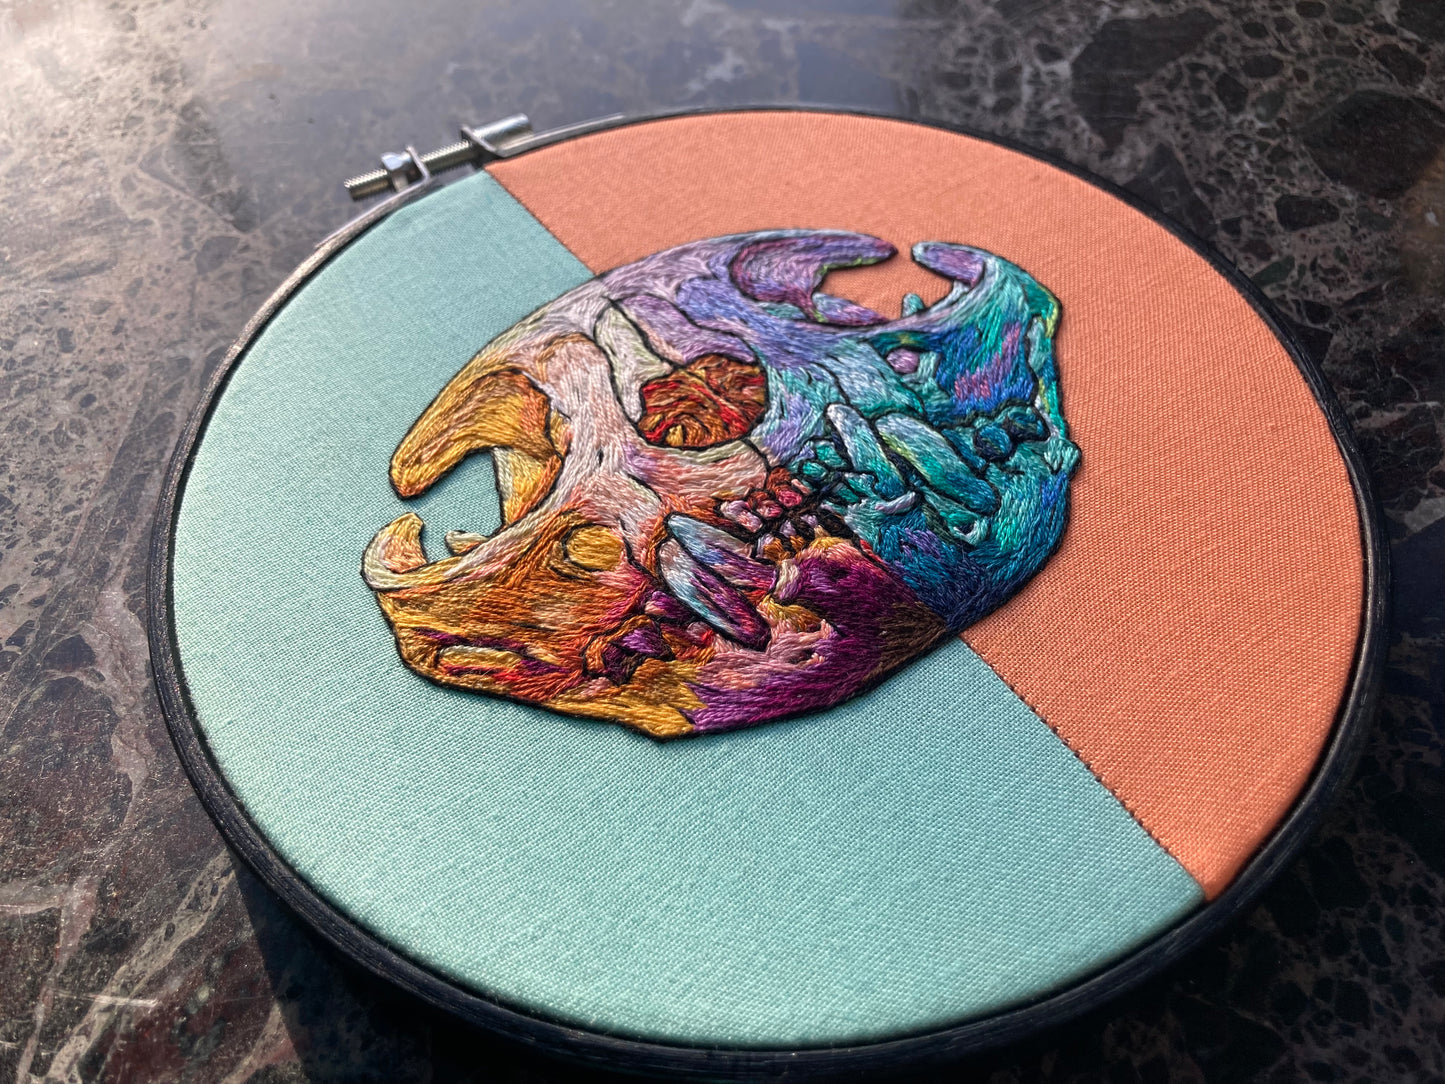 a vibrantly colored embroidered cat skull in a black hoop sits on a black marble surface. The fabric in the hoop is aqua on the left side and apricot on the right, and the stitching mirrors that split with warm tones on the left and cool tones on the right. 